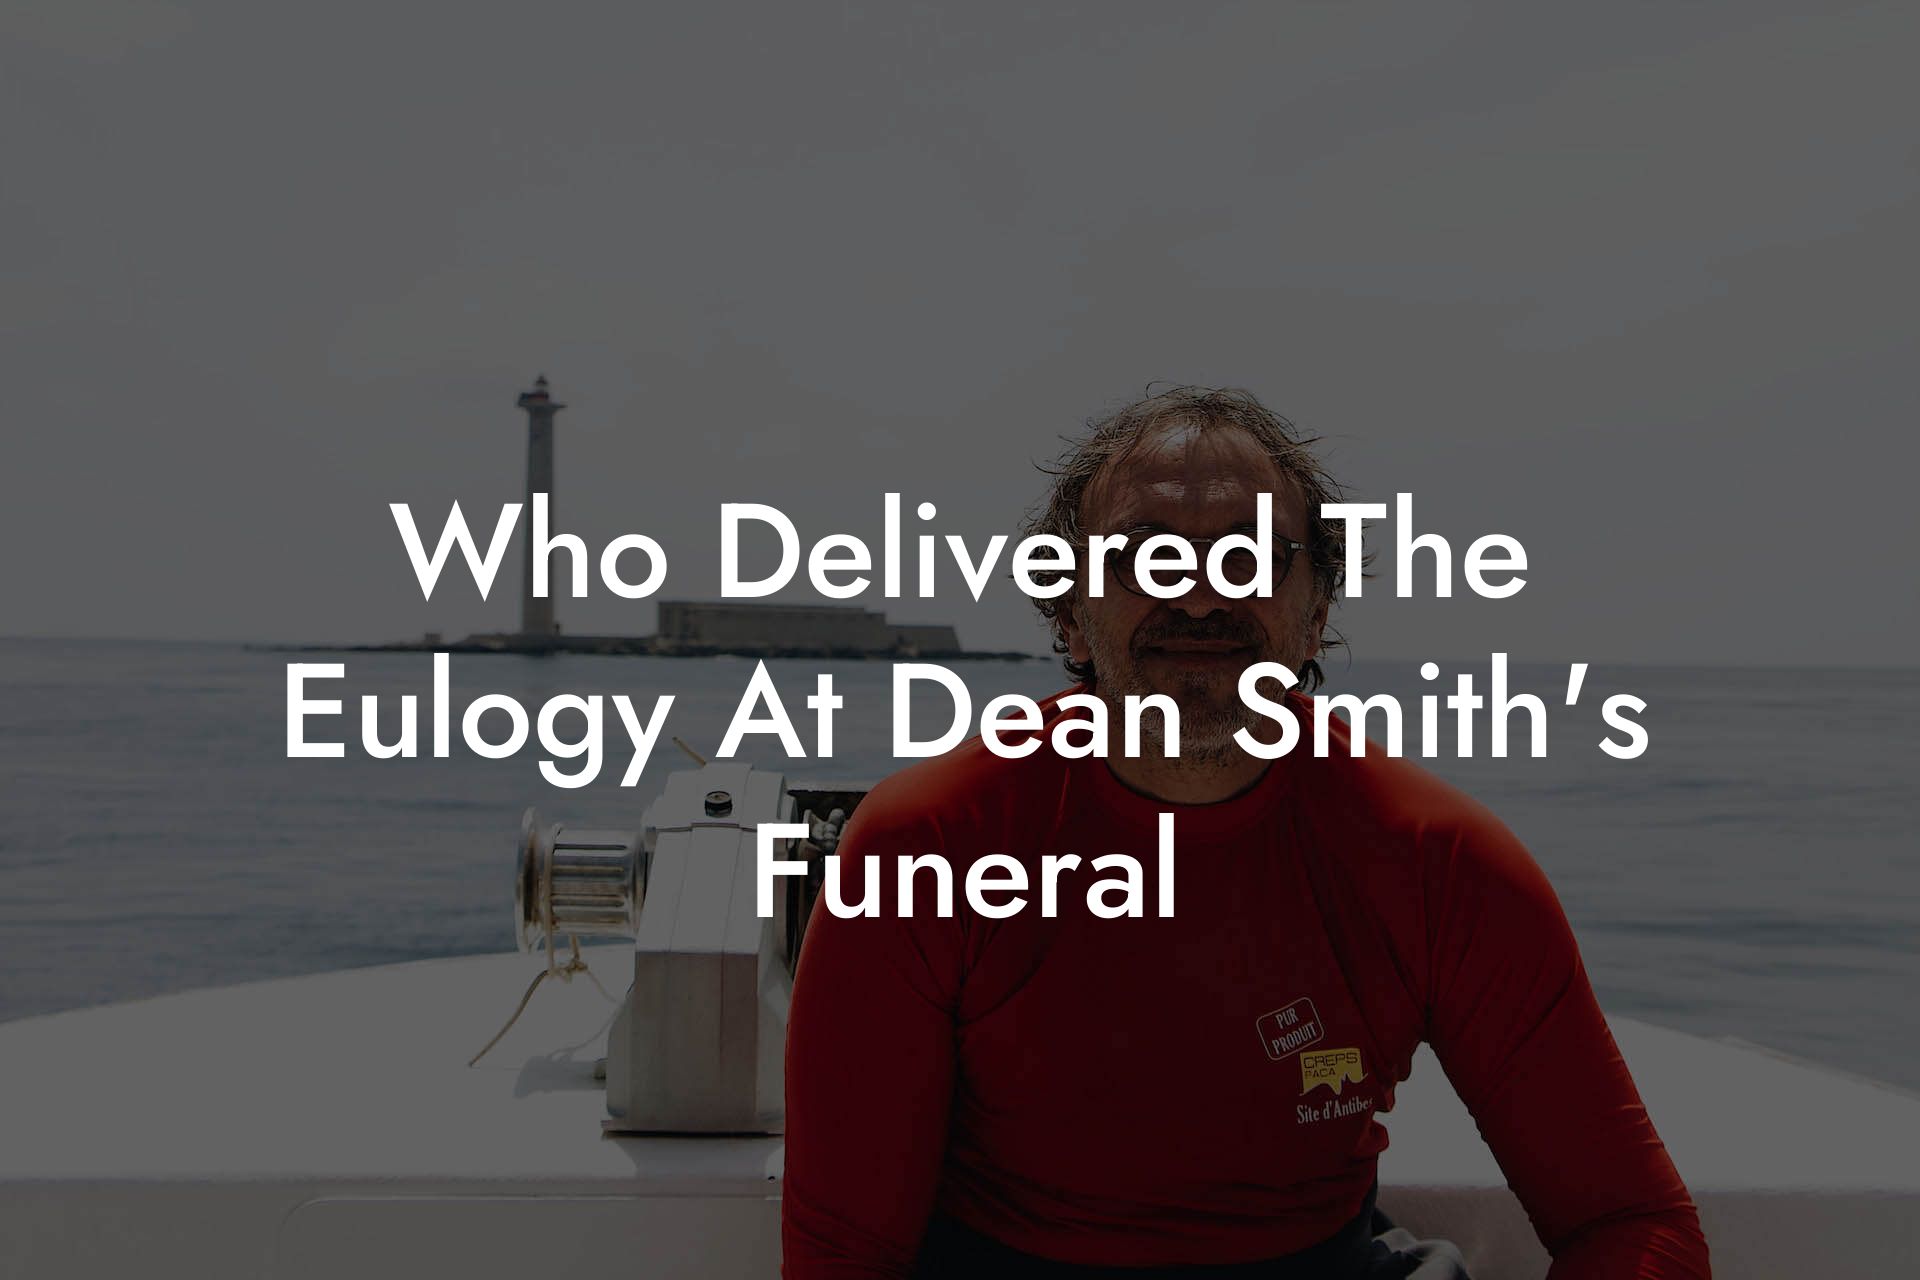 Who Delivered The Eulogy At Dean Smith's Funeral